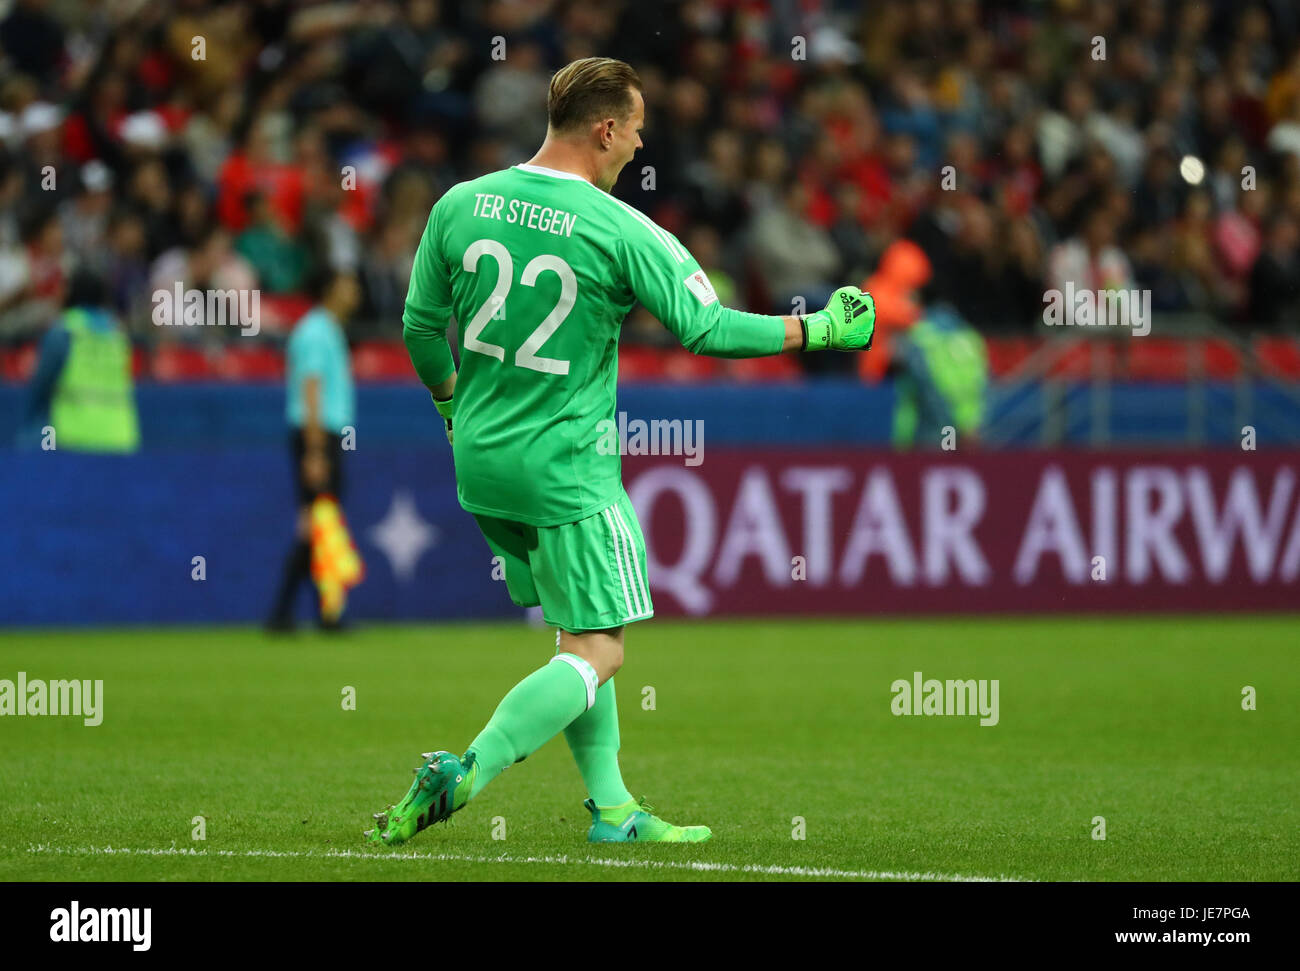 Kazan, Russia. 22nd June, 2017. German goalkeeper Marc-Andre ter Stegen celebrates the equalizer during the Group B preliminary stage soccer match between Chile and Germany at the Confederations Cup in Kazan, Russia, 22 June 2017. Photo: Christian Charisius/dpa/Alamy Live News Stock Photo